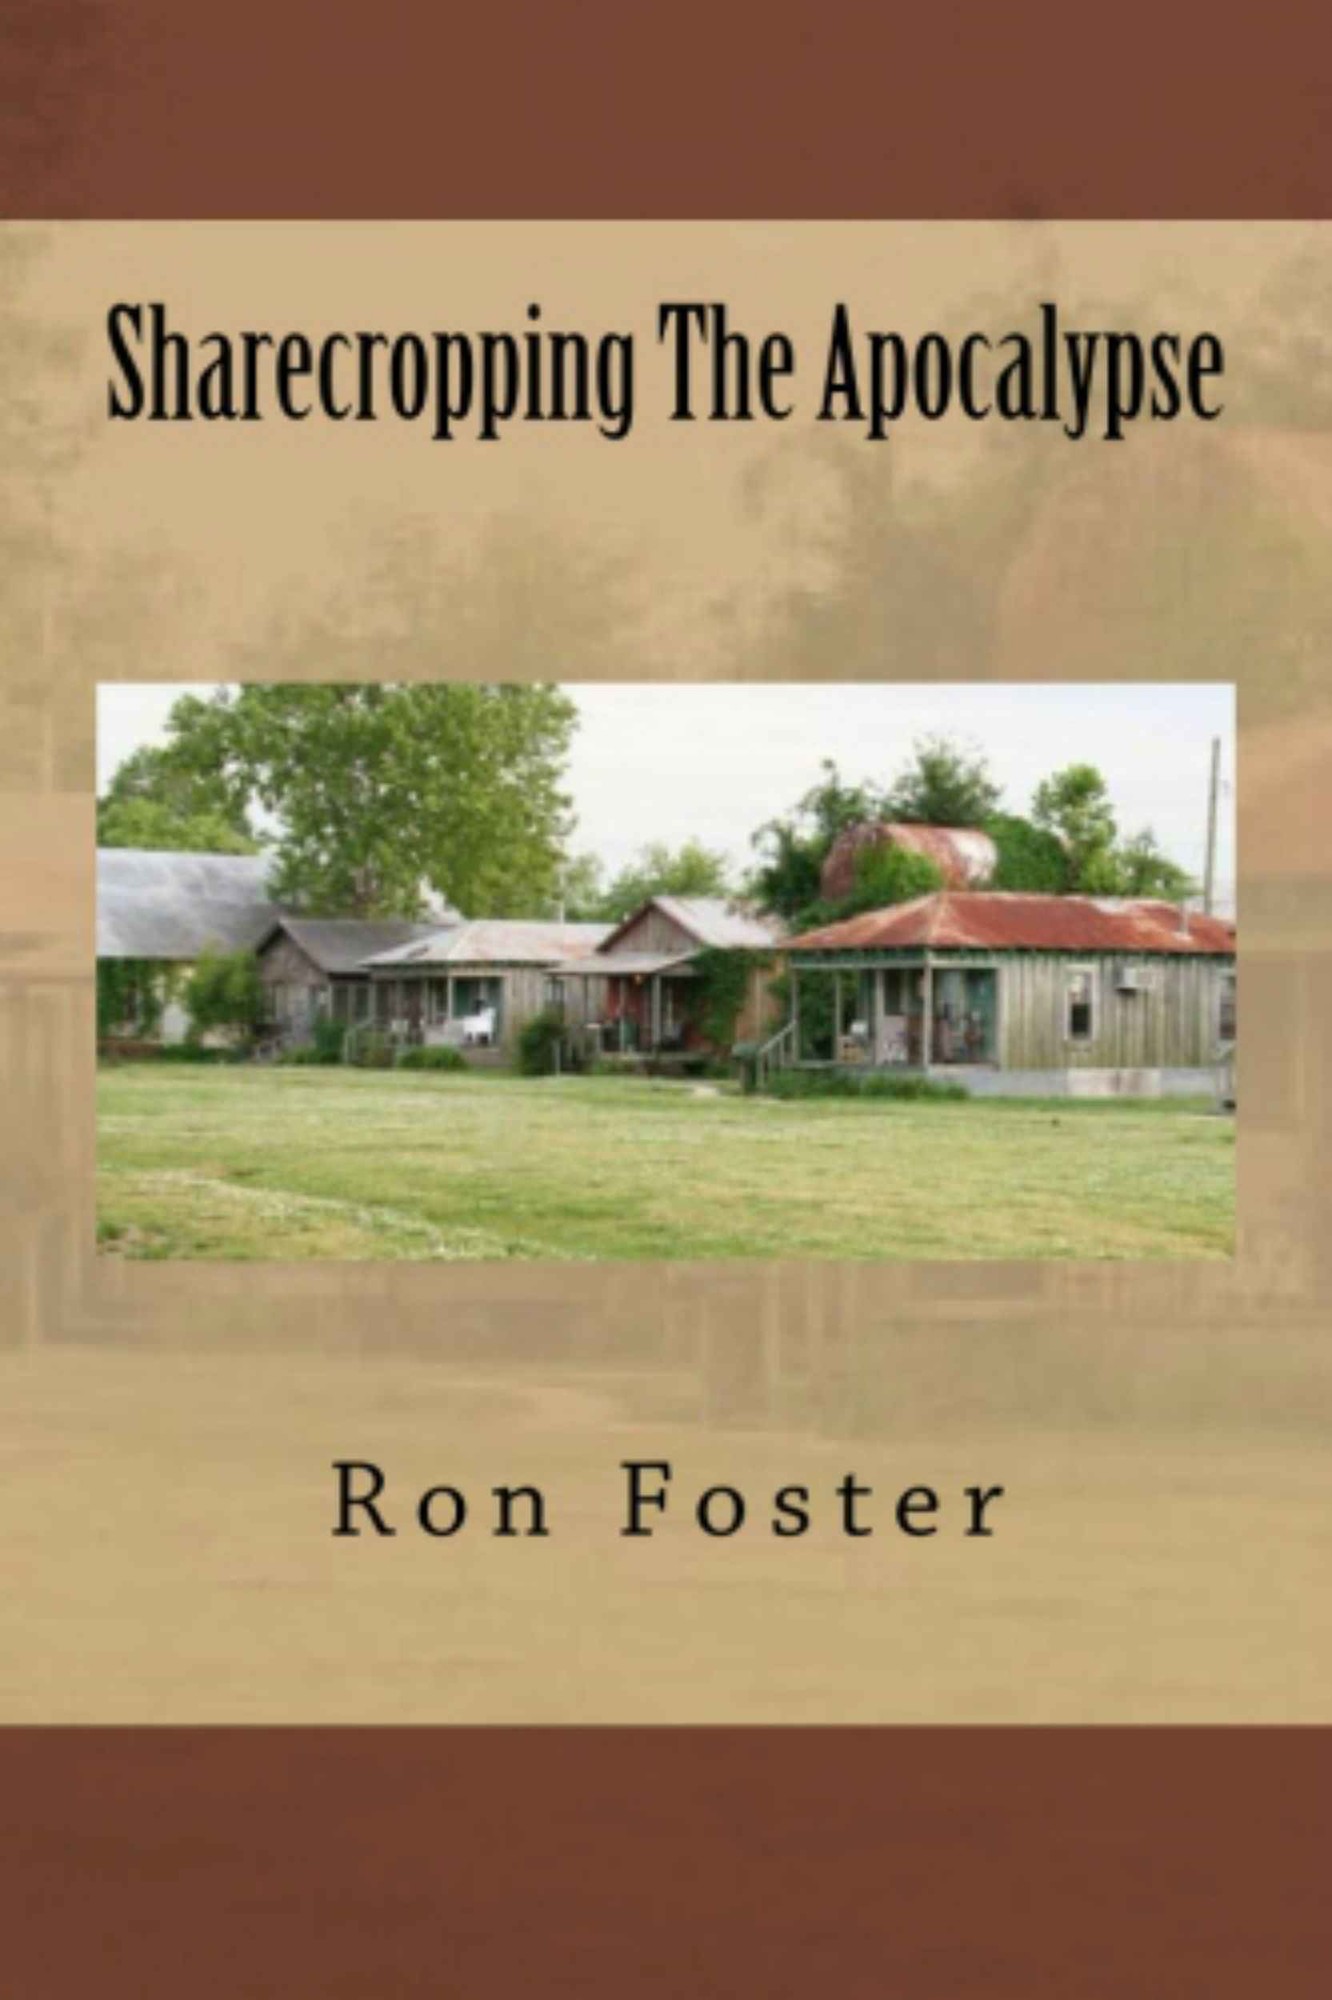 Sharecropping The Apocalypse: A Prepper is Cast Adrift by Ron Foster